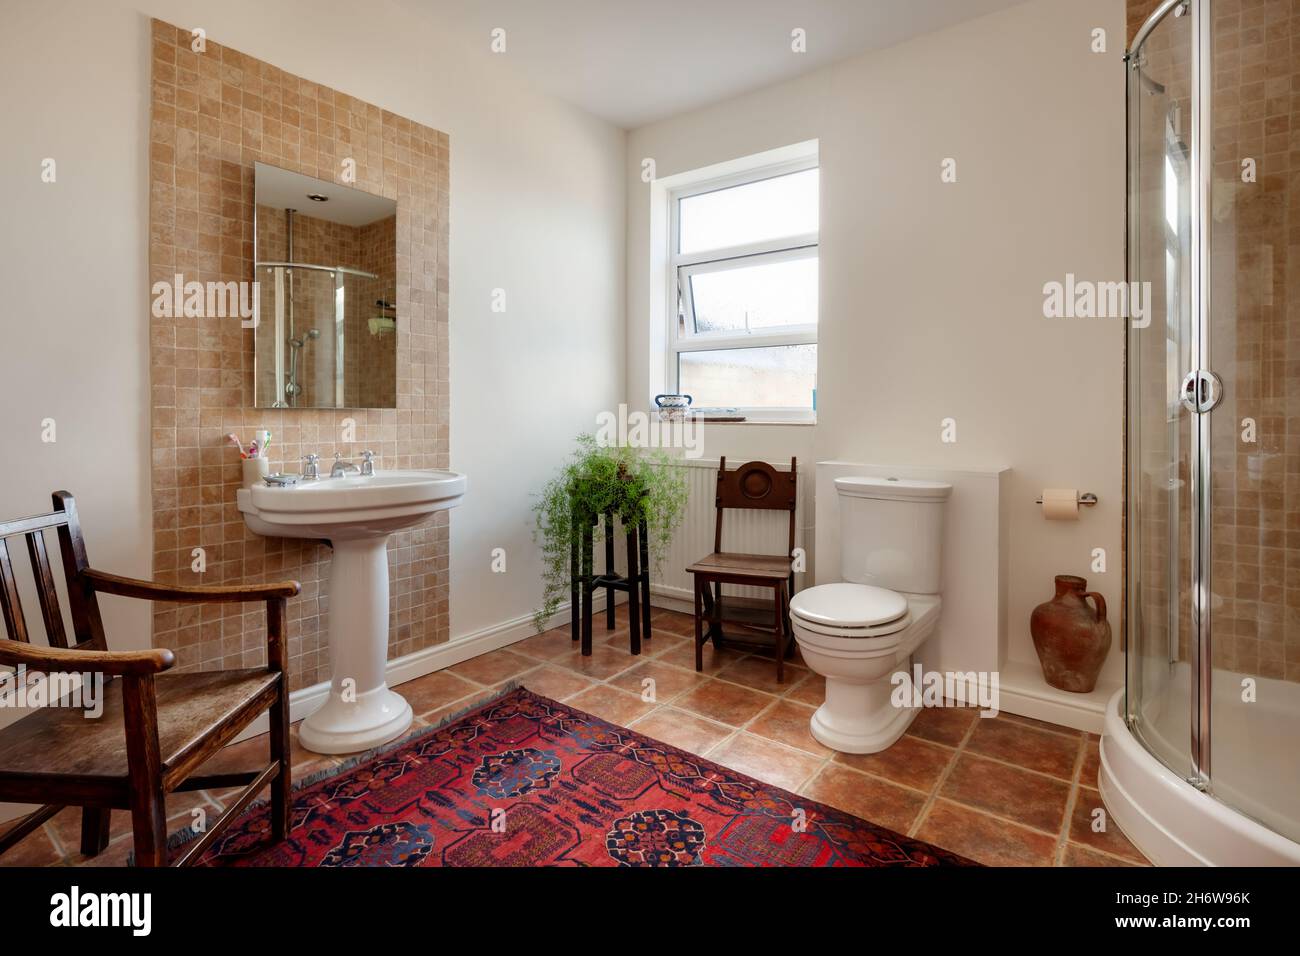 Cambridge, England - October 29 2019: Shower and Bathroom with white painted walls, tiled floor, toilet and sink Stock Photo